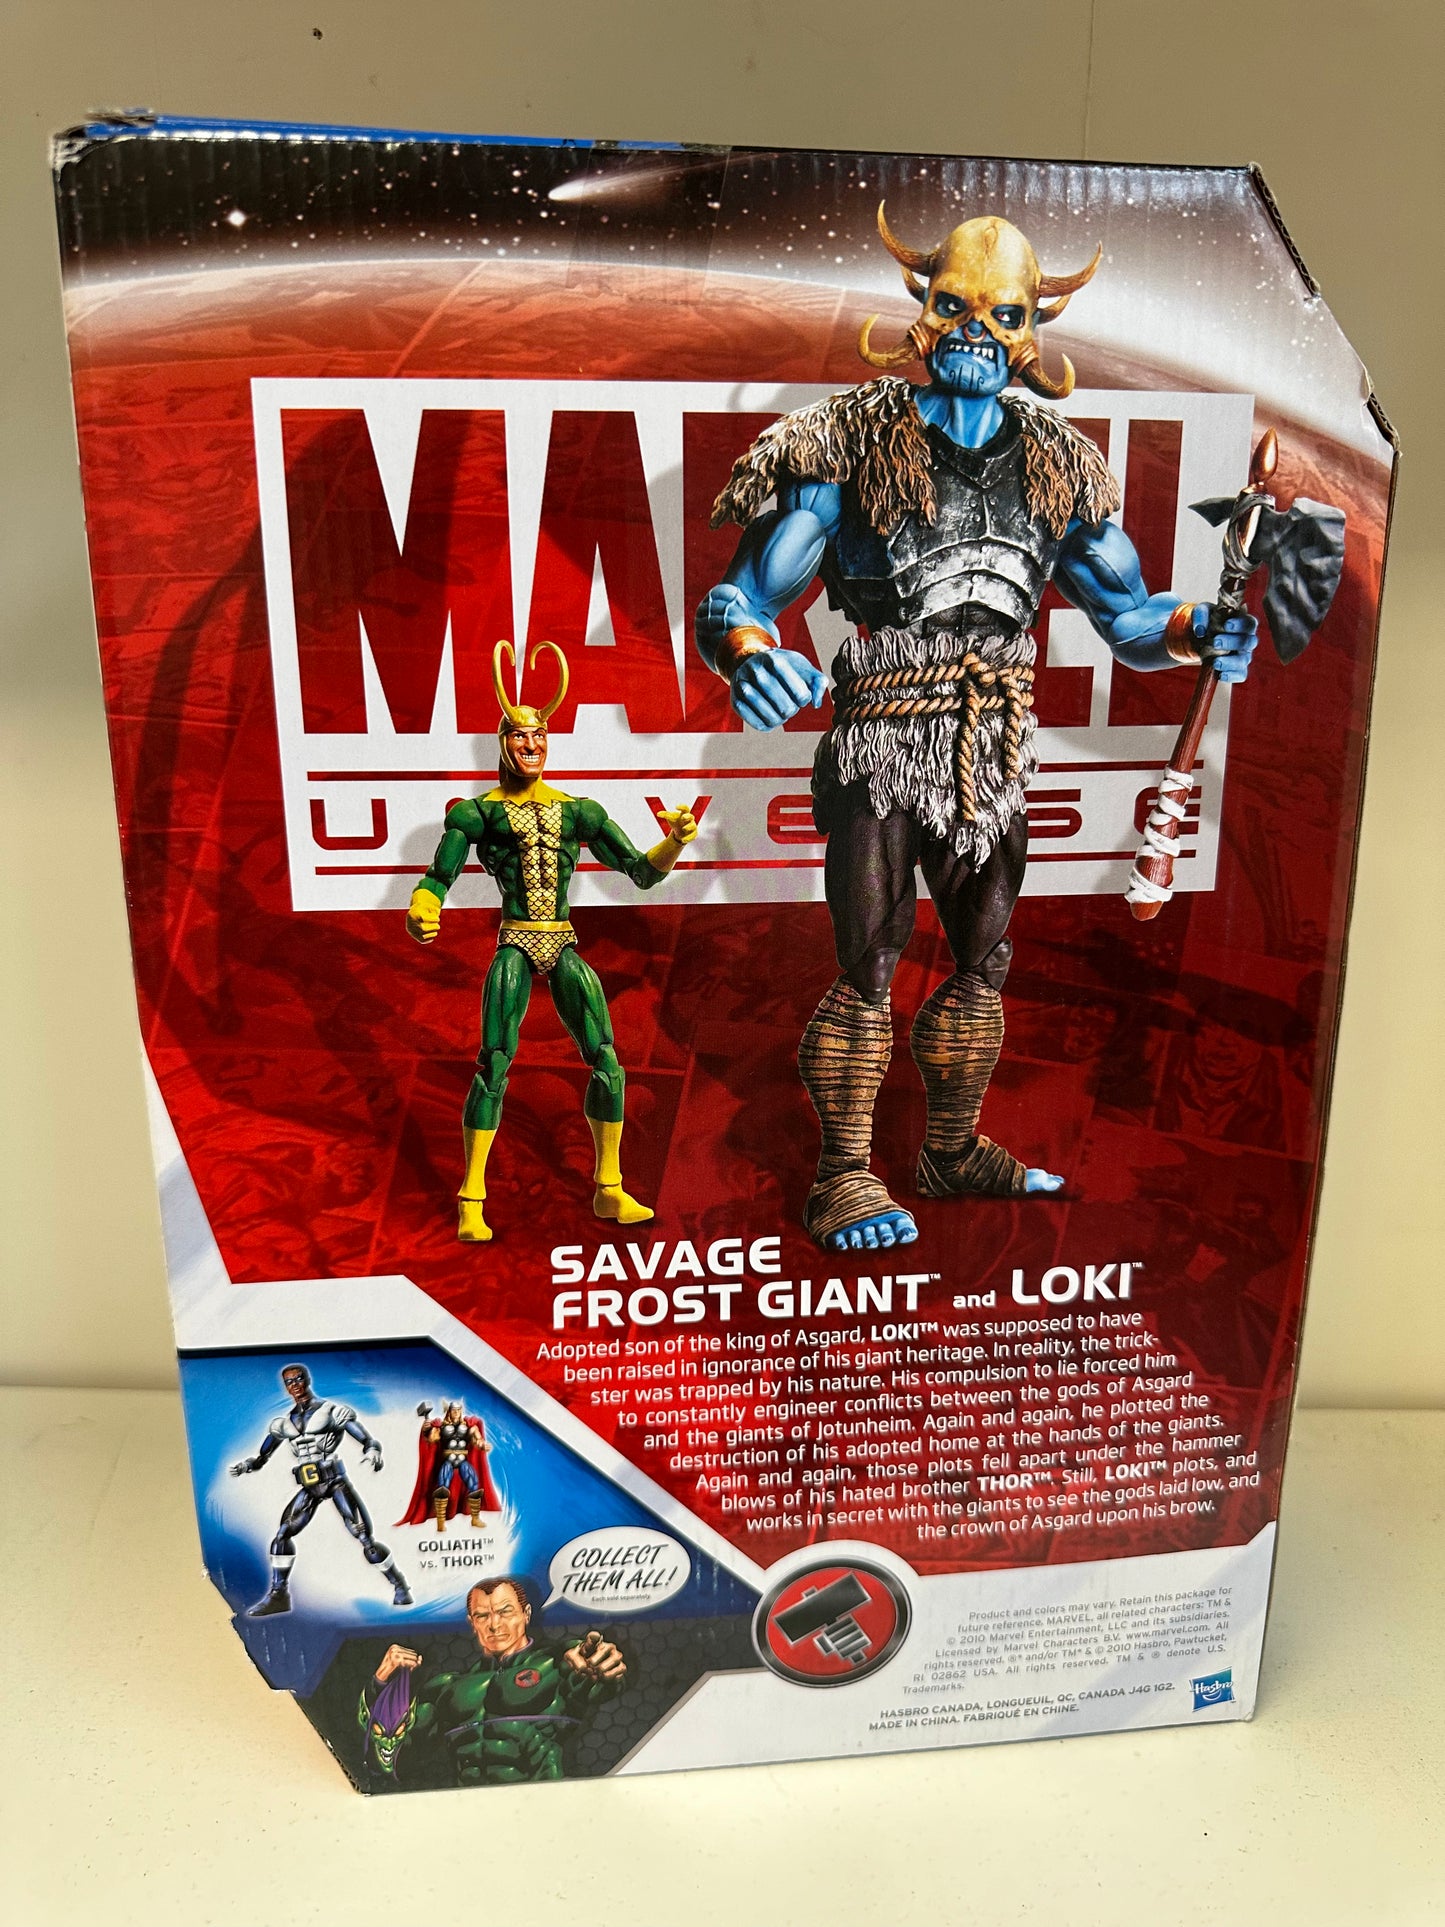 Marvel Universe Savage Frost Giant and Loki 3.75” Scale Wal-Mart Exclusive Sealed